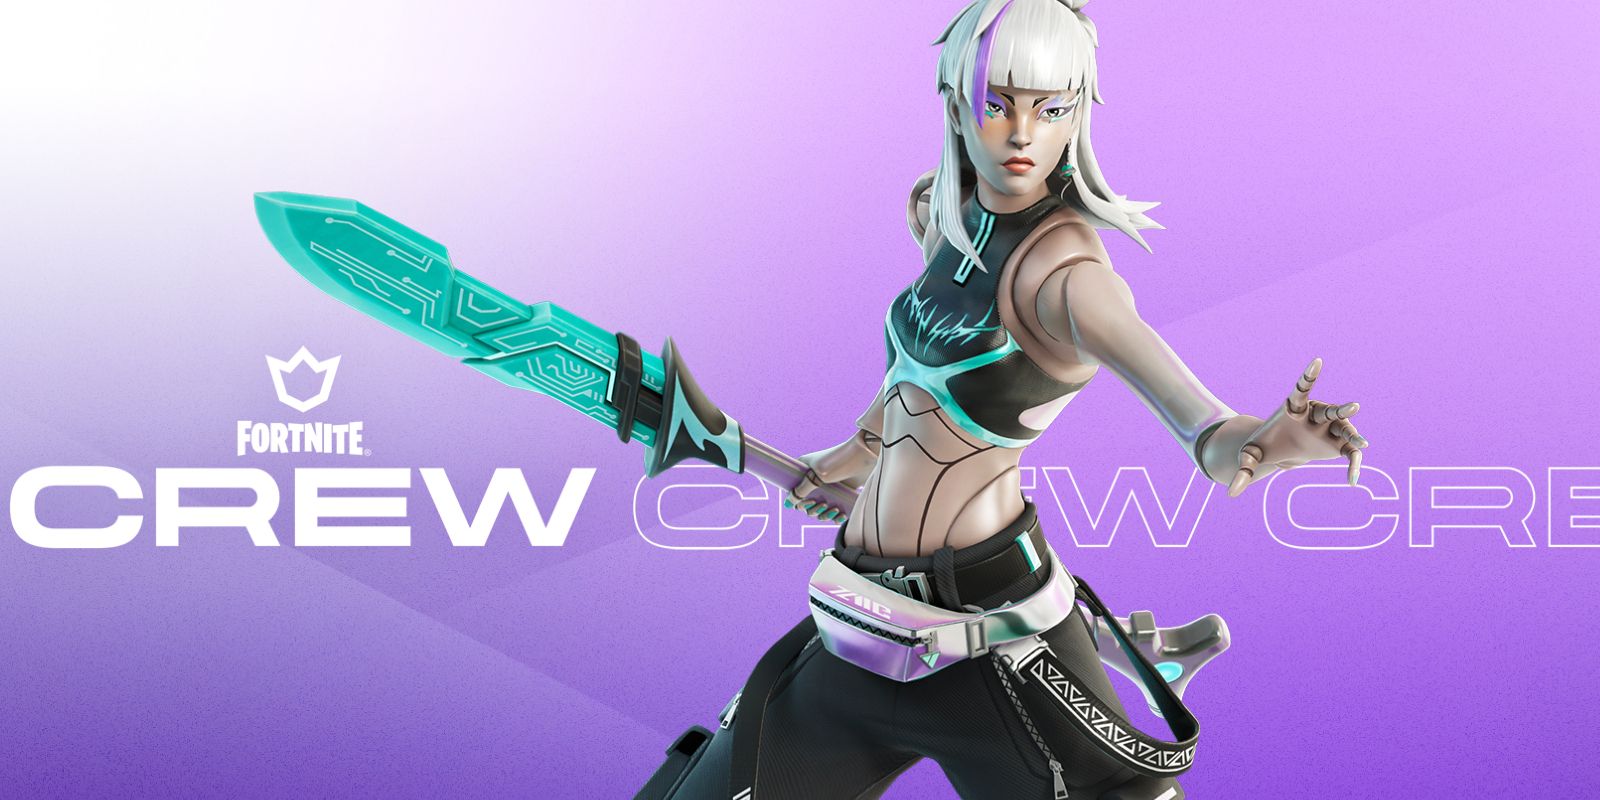 Fortnite May 2023 Crew Pack Official Artwork Featuring Dahlia Holding Codecarver Pickaxe